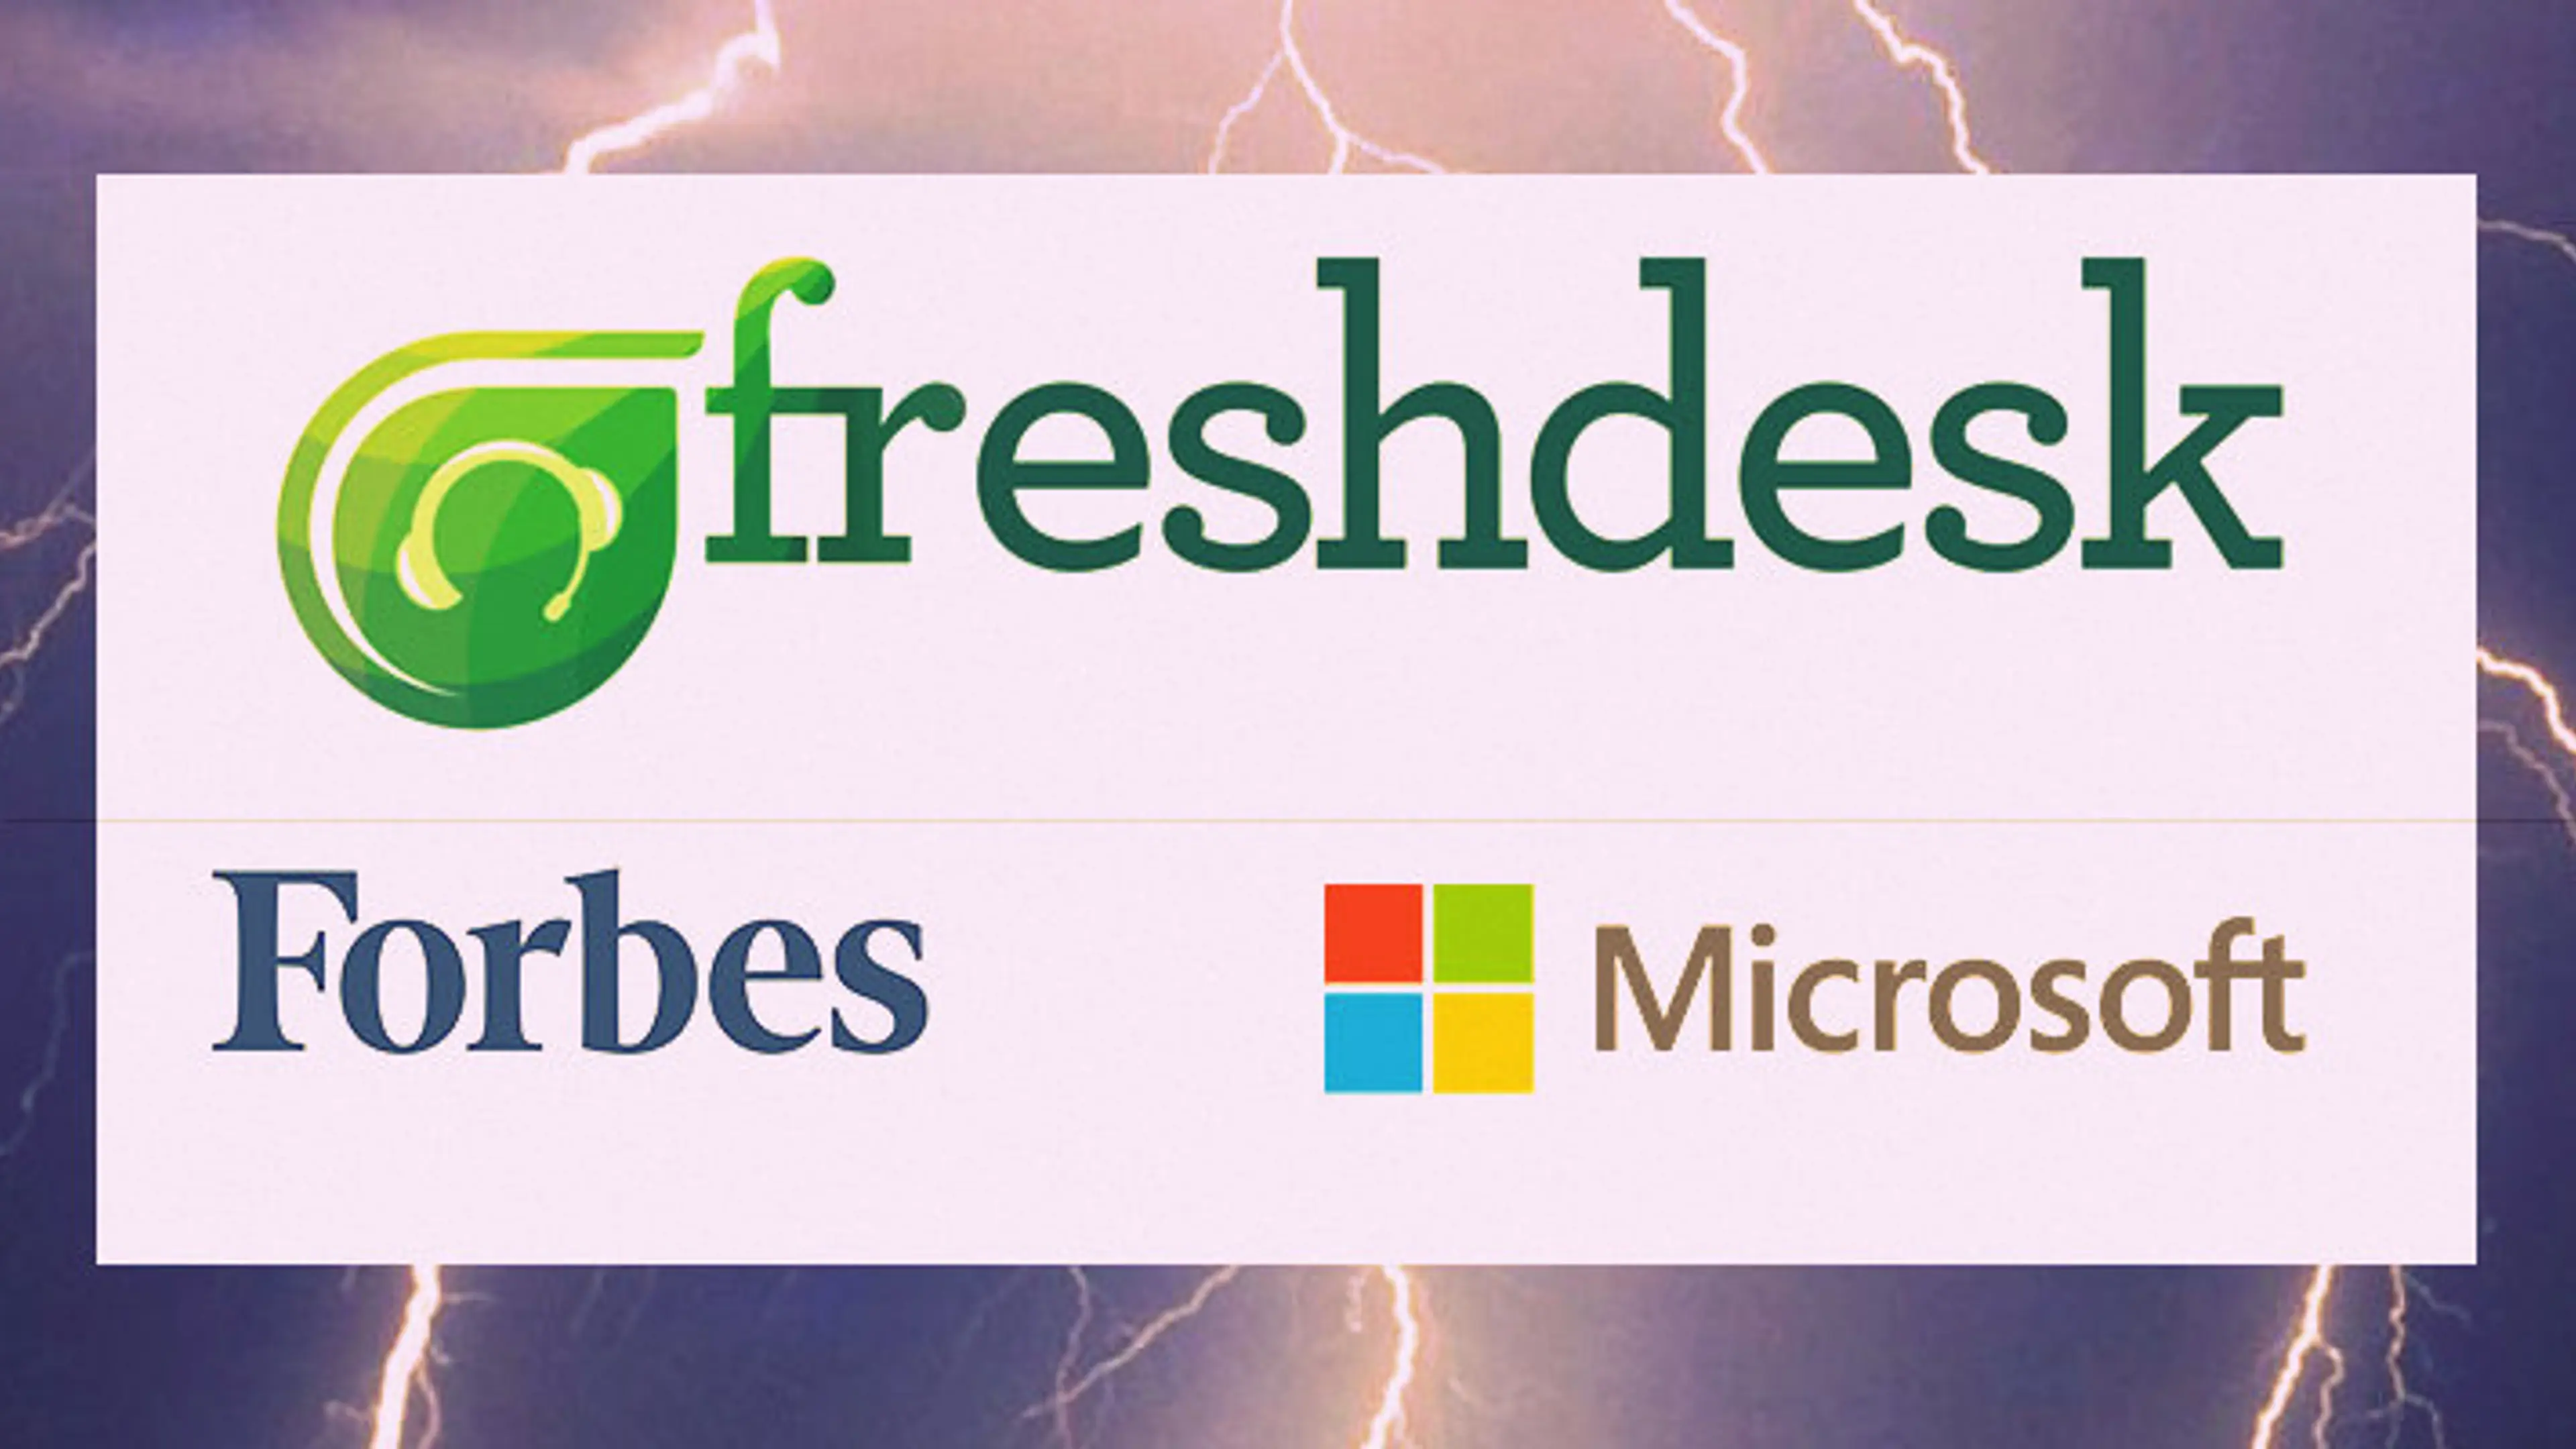 The report of my death was an exaggeration, Freshdesk tells Forbes & Microsoft